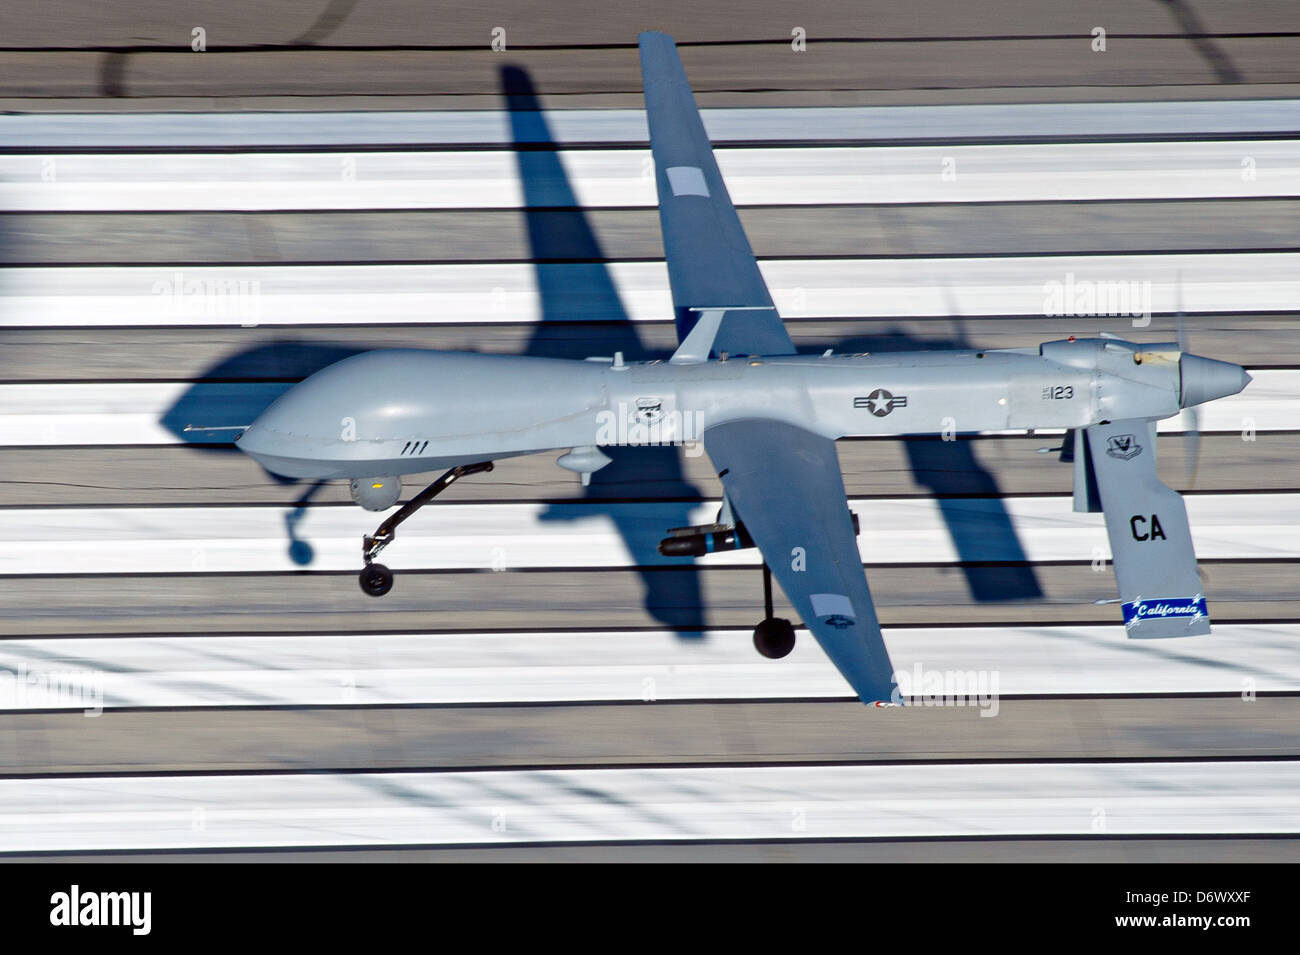 US Air Force MQ-1 Predator unmanned aerial vehicle assigned to the California Air National Guard's 163rd Reconnaissance Wing takes off at the Southern California Logistics Airport January 7, 2012 in Victorville, CA. Stock Photo